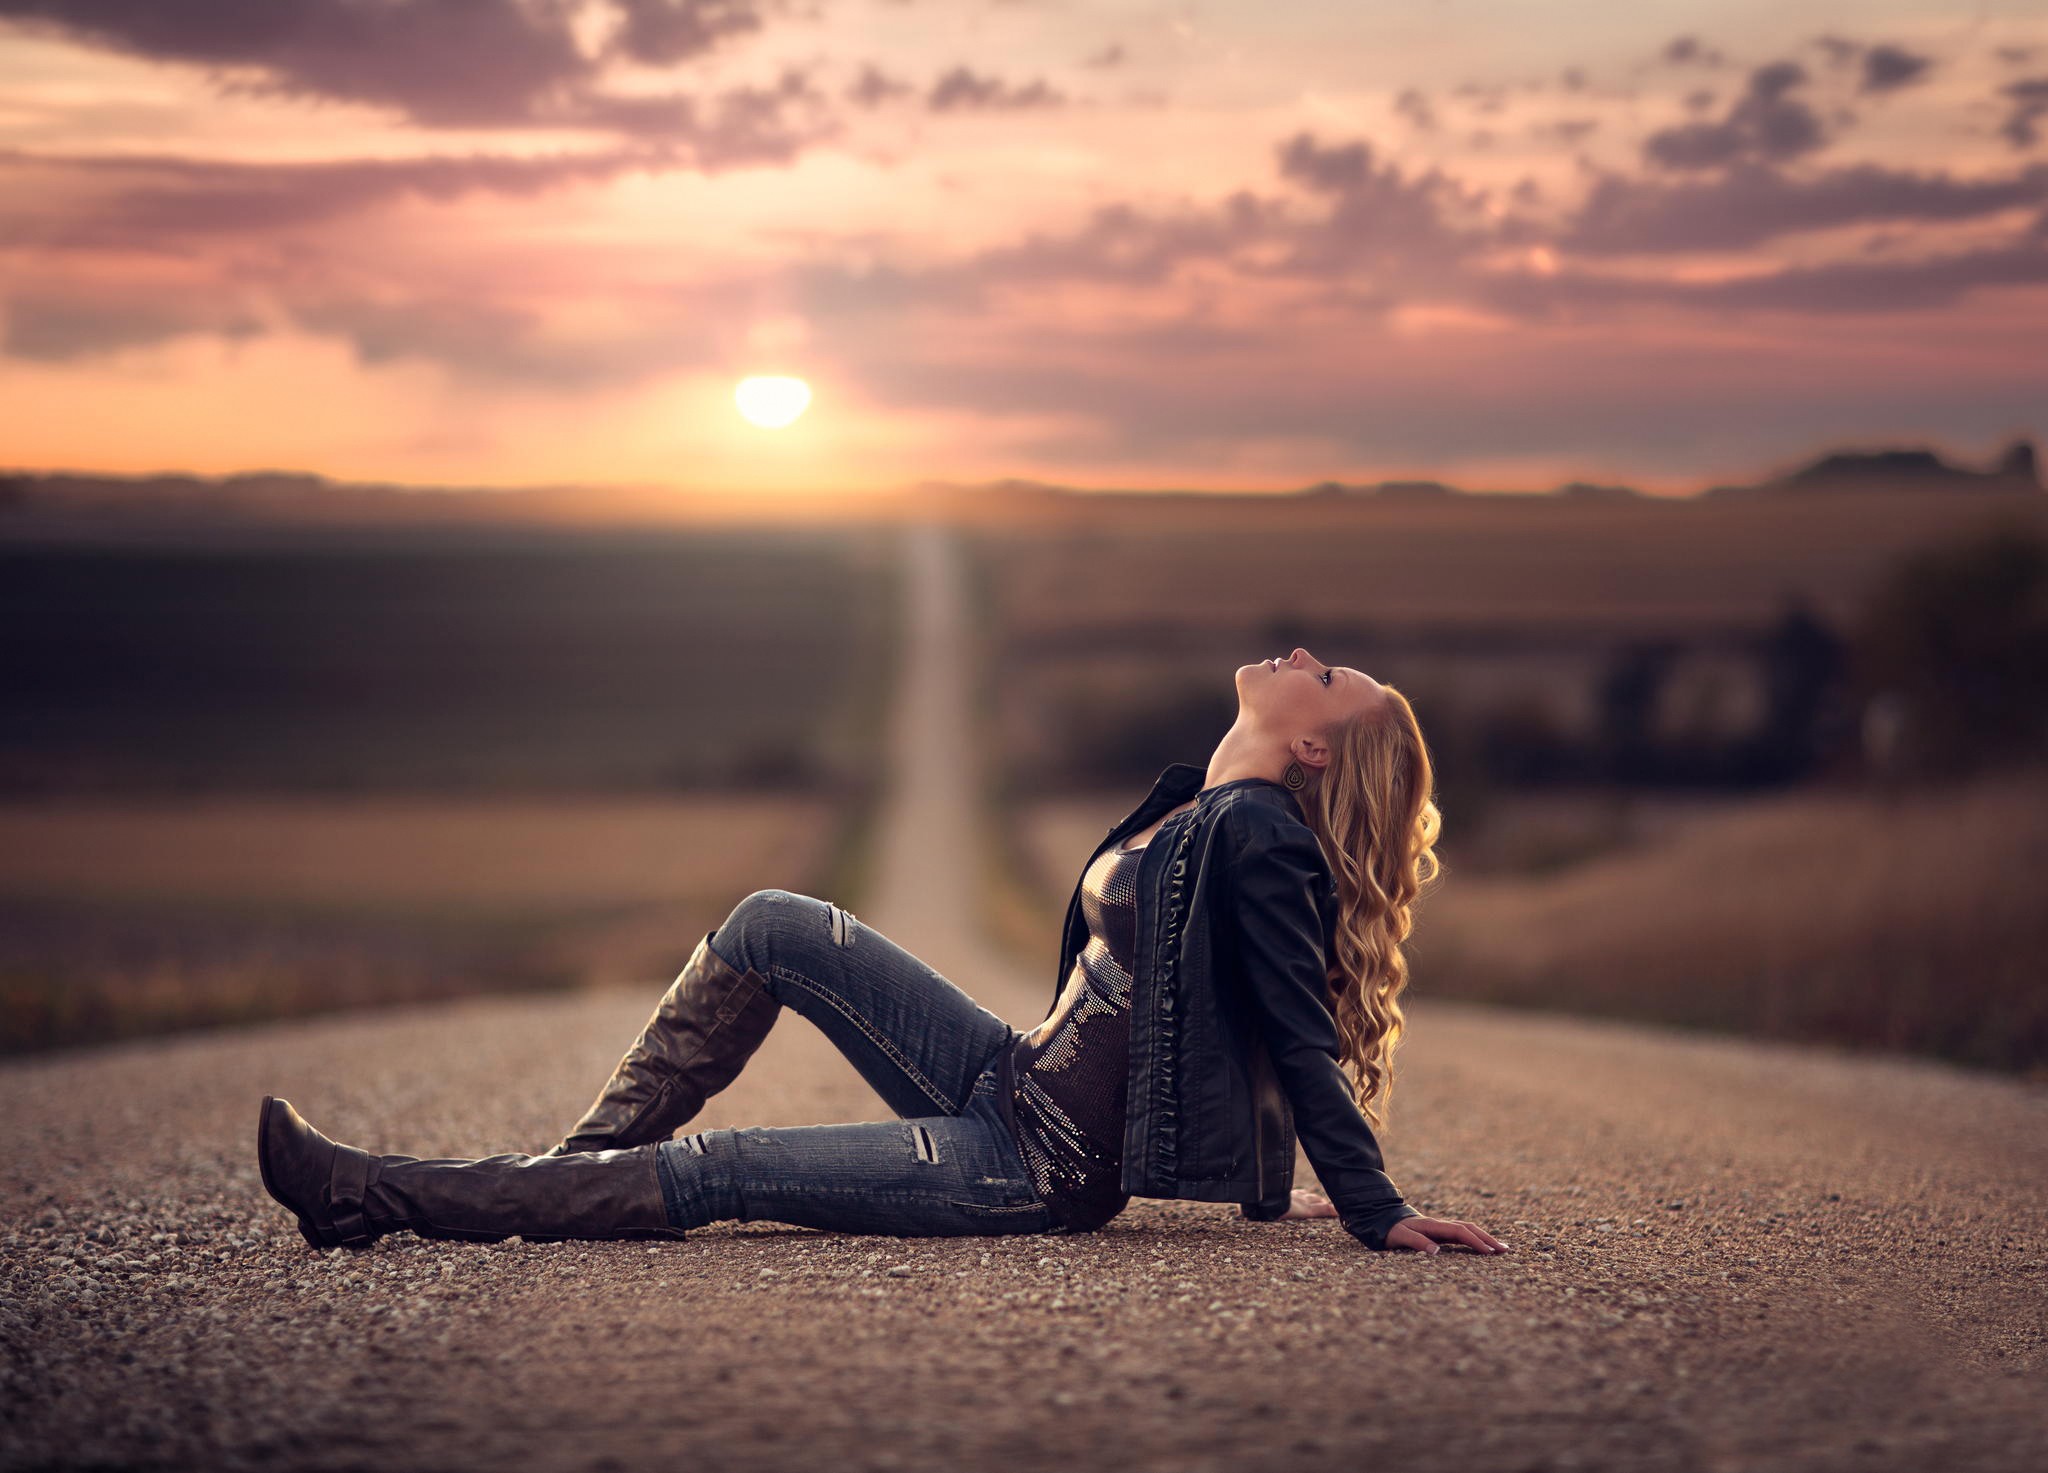 People 2048x1473 women road landscape Jake Olson looking up curly hair blonde jeans depth of field black jackets knee-high boots torn jeans sky dirt road long hair sitting women outdoors outdoors